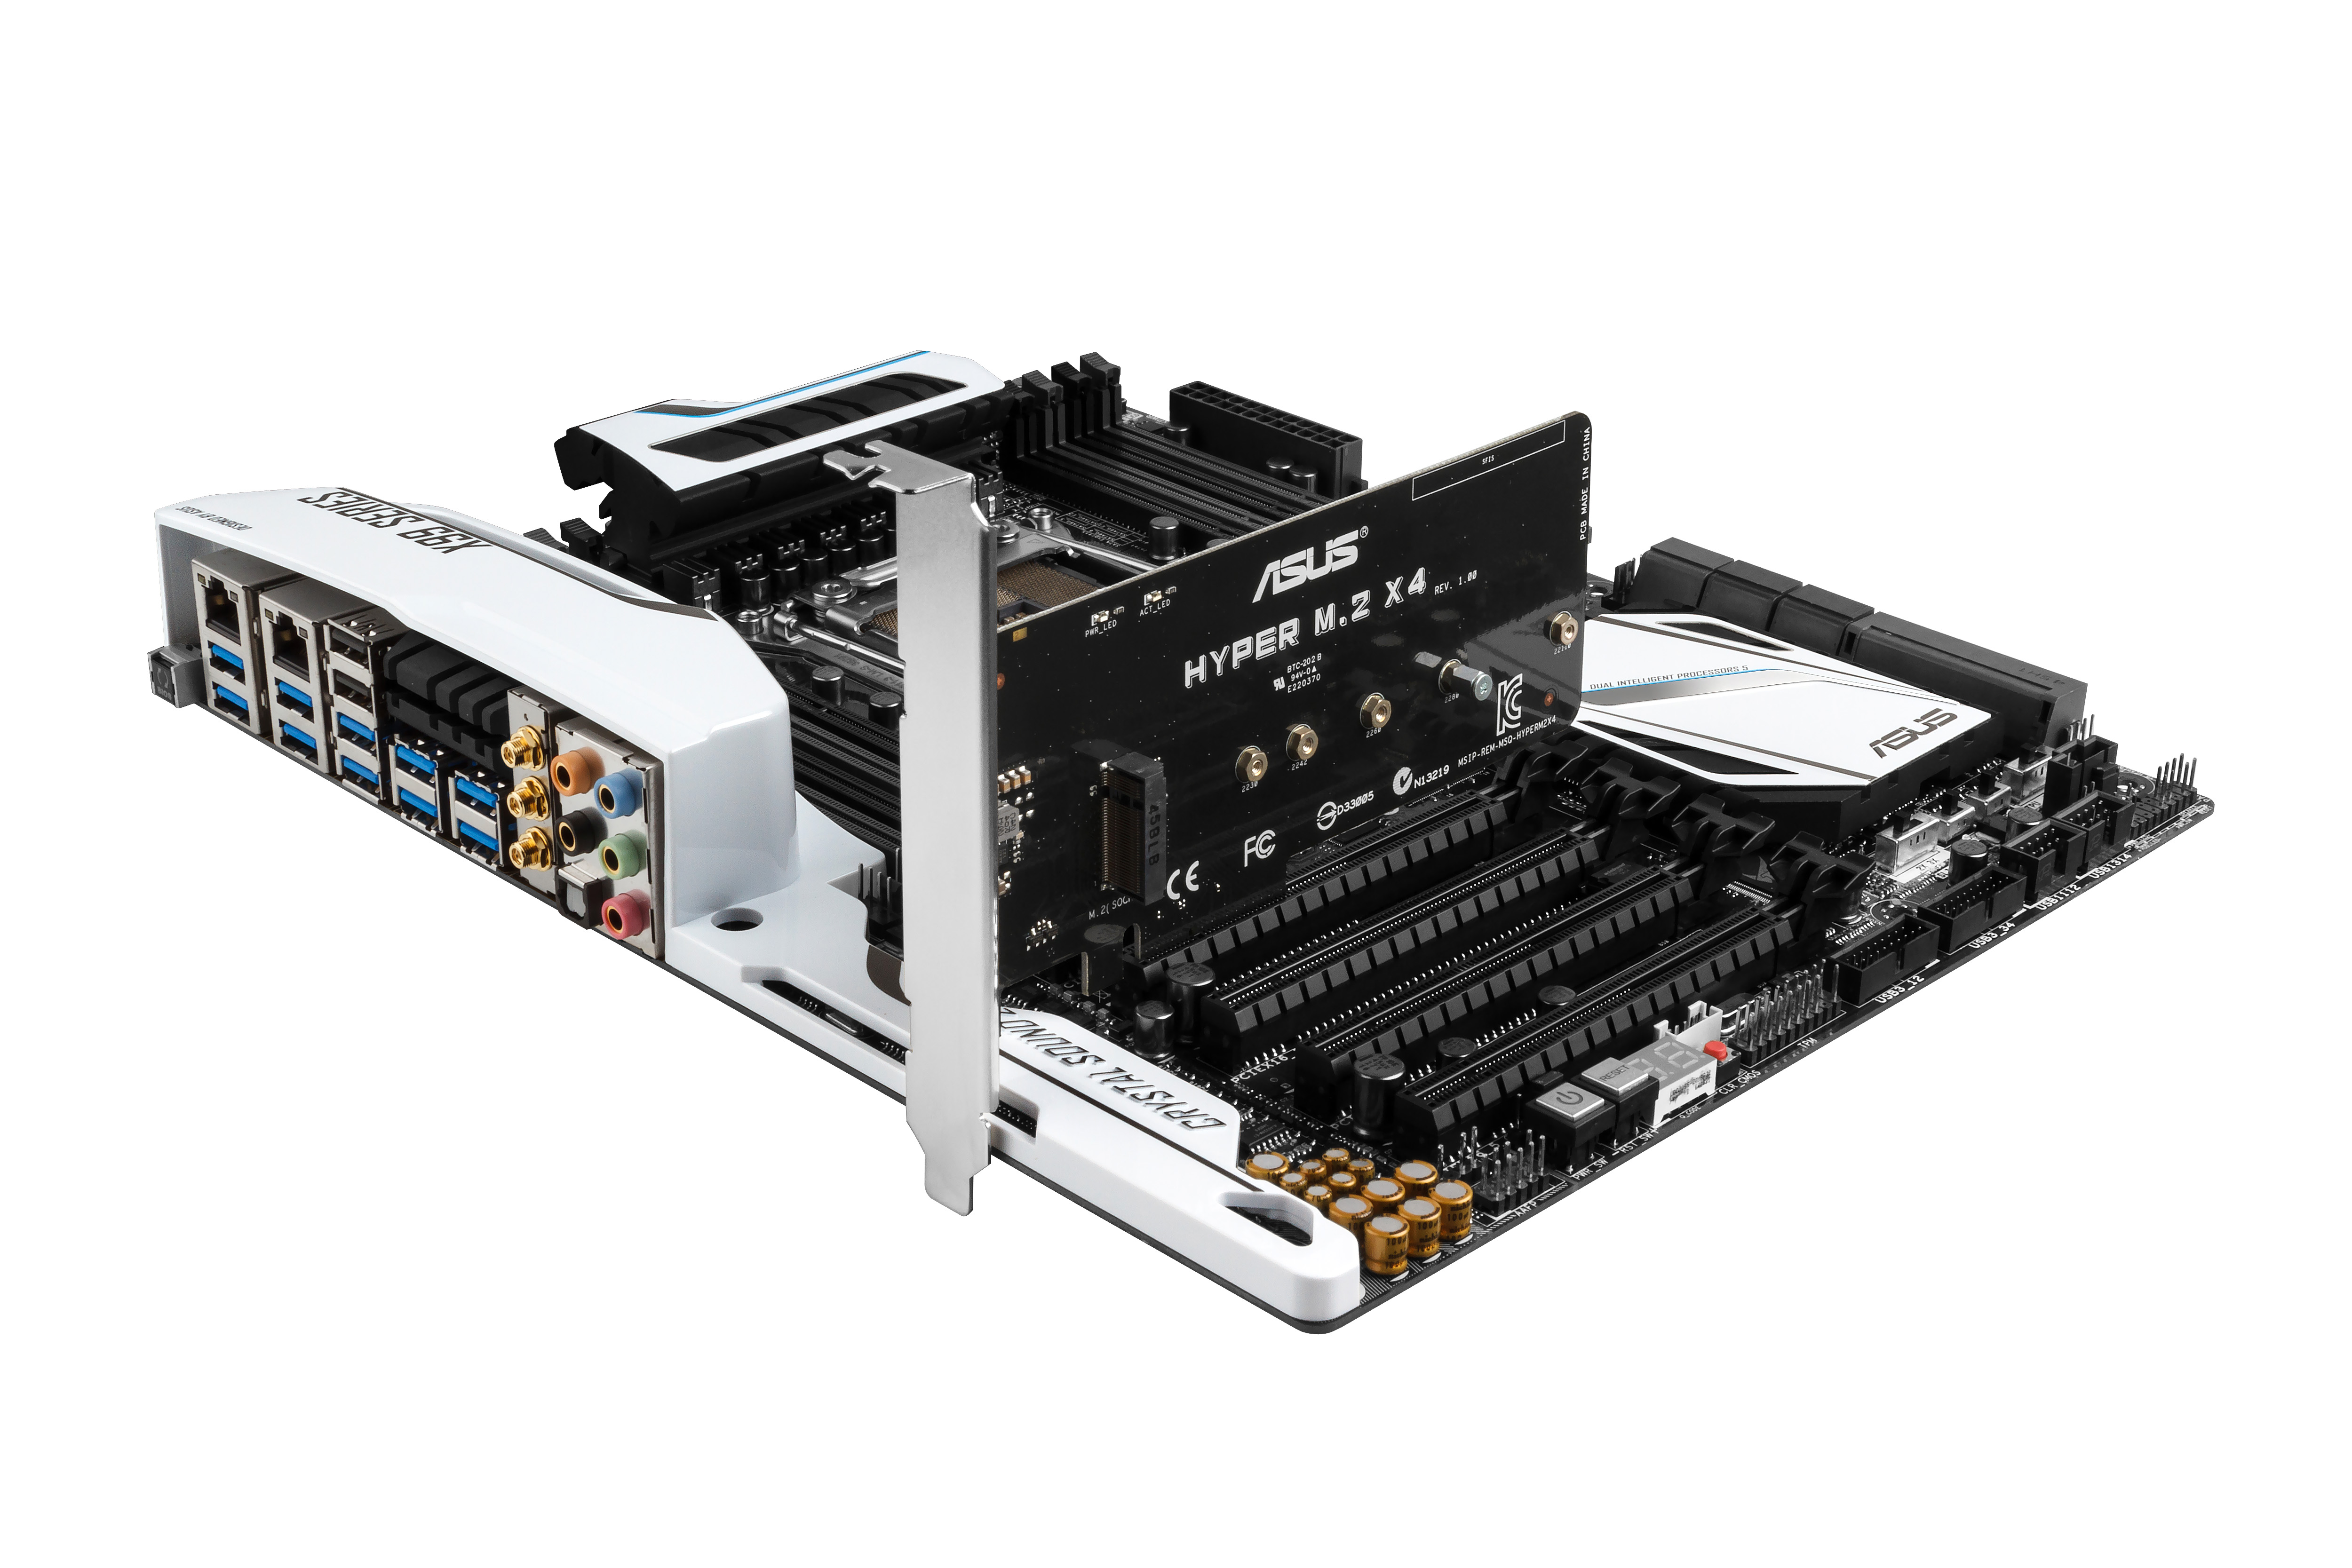 ASUS X99-Deluxe Overview, Board Features - The Intel Haswell-E X99